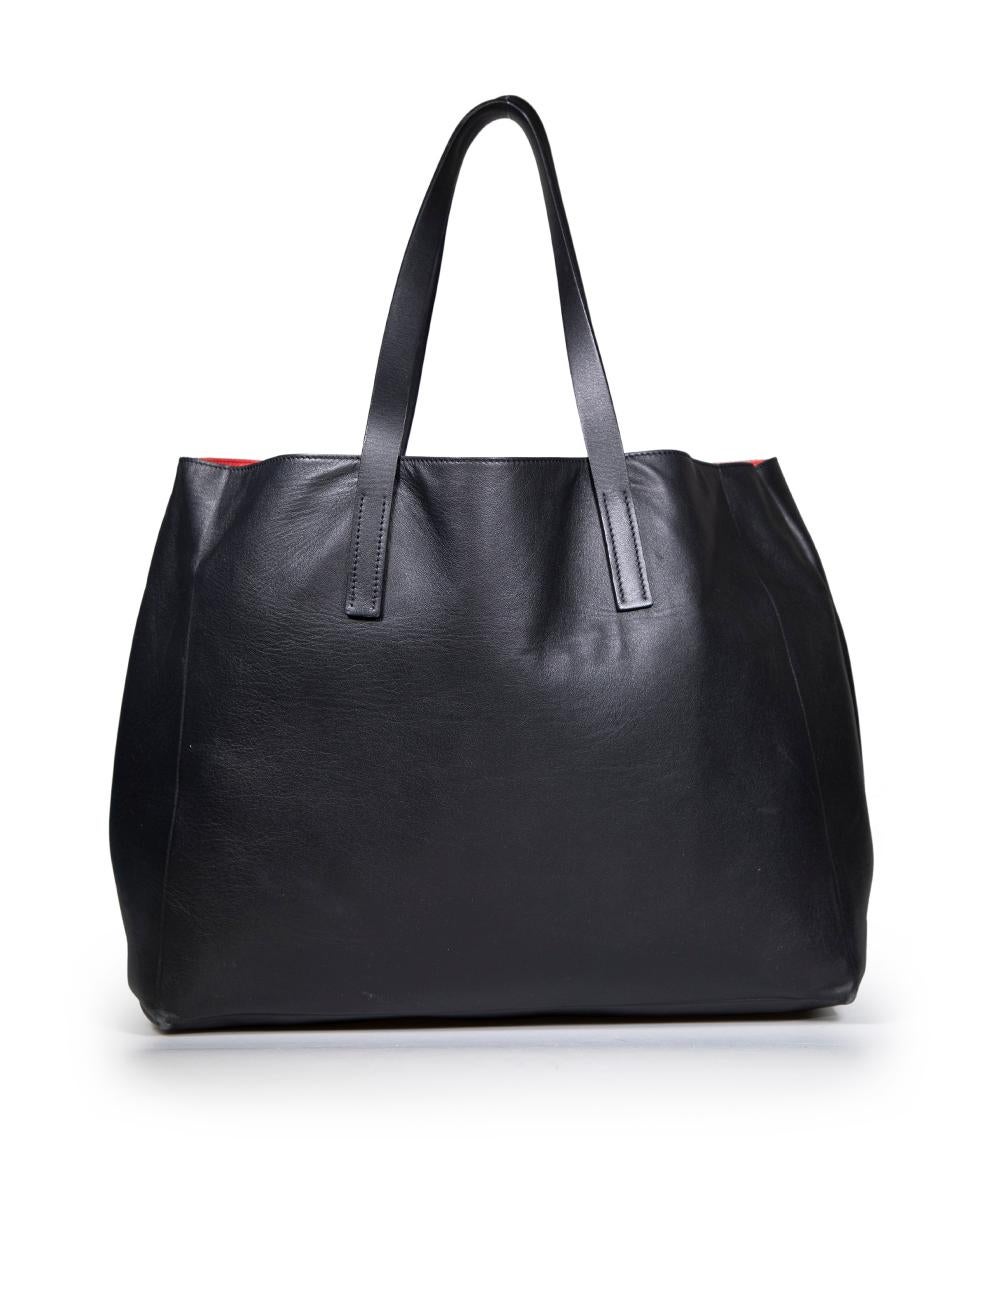 Valentino Black Leather V Ring Large Tote In Good Condition For Sale In London, GB